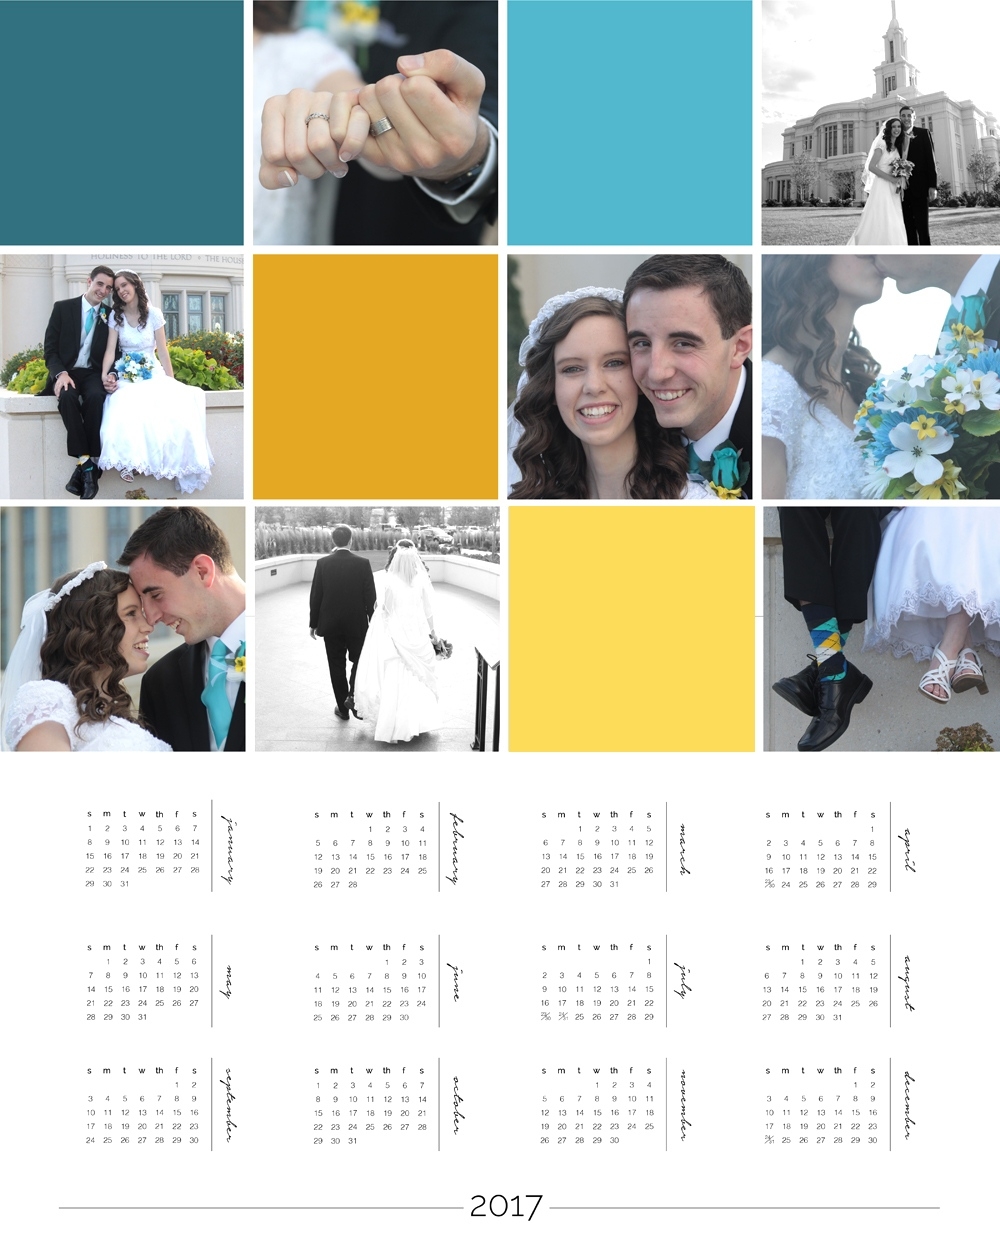 Make A Personalized Photo Wall Calendar + Photoshop Elements How To Make A Calendar Template In Photoshop